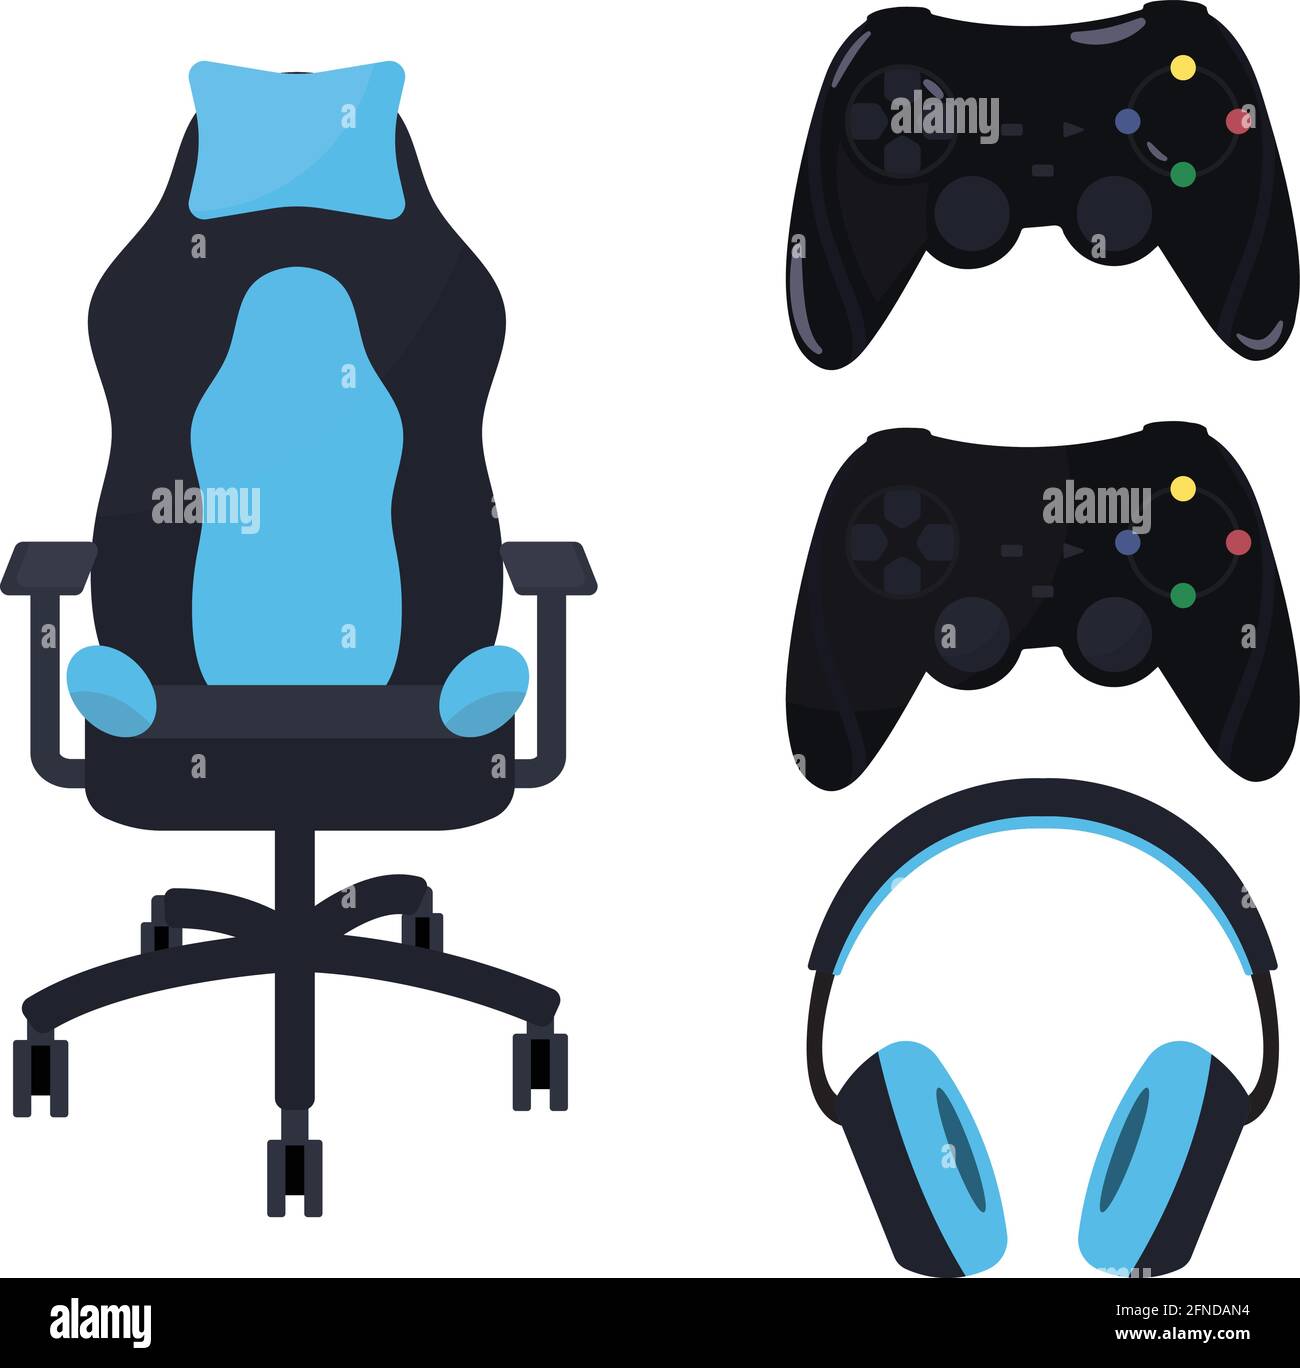 Set of gaming equipment- controller (joystick), headset (headphones) and gaming chair. Drawn in blue and black, minimalist style. Stock Vector